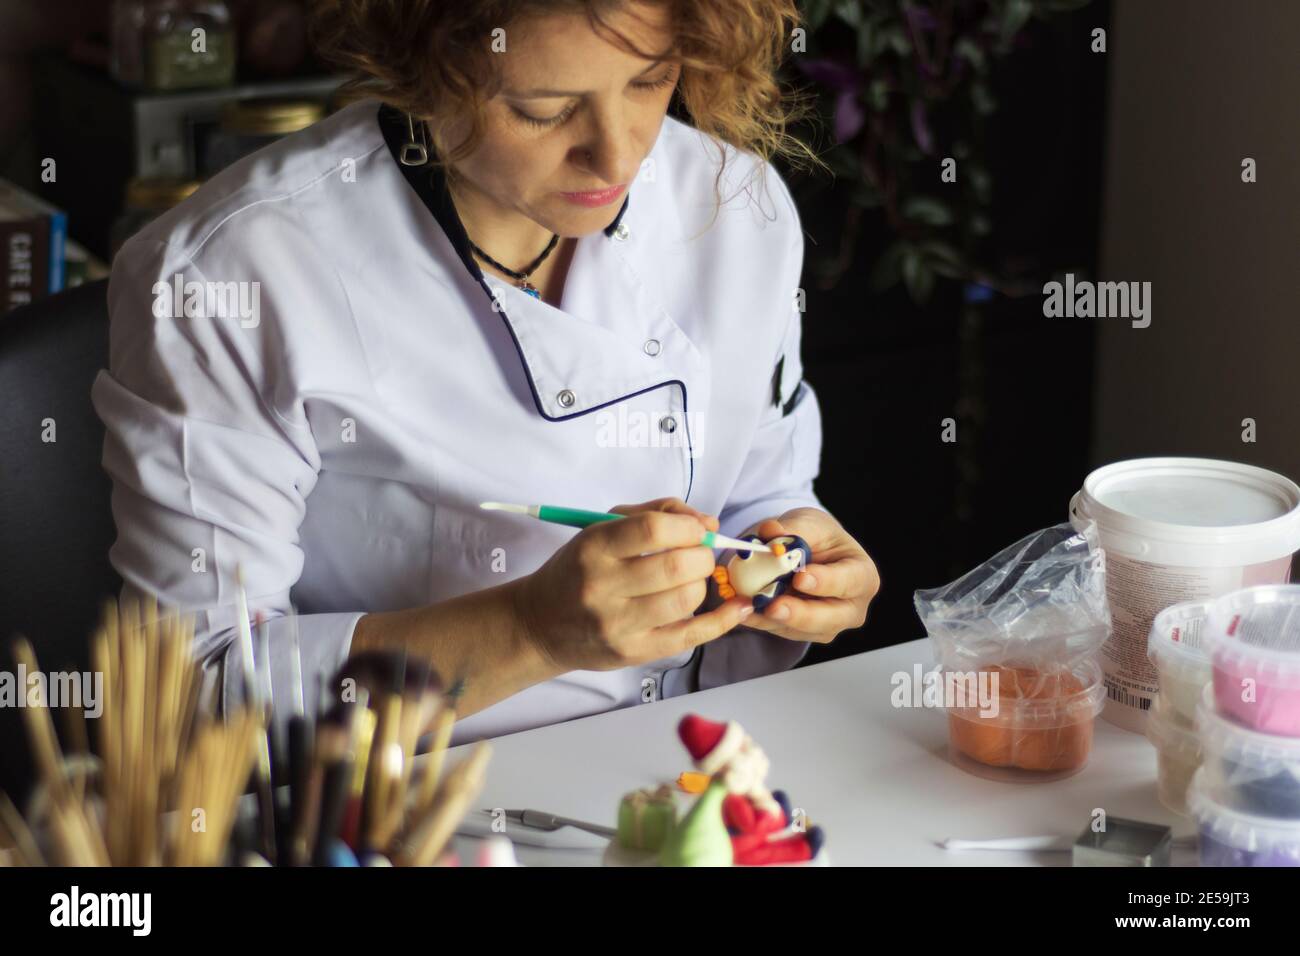 Cake decorating process. Baker uses tools to sculpt fondant patterns: edible art, cake design, cake decorating. Selective focus front tools and hand Stock Photo